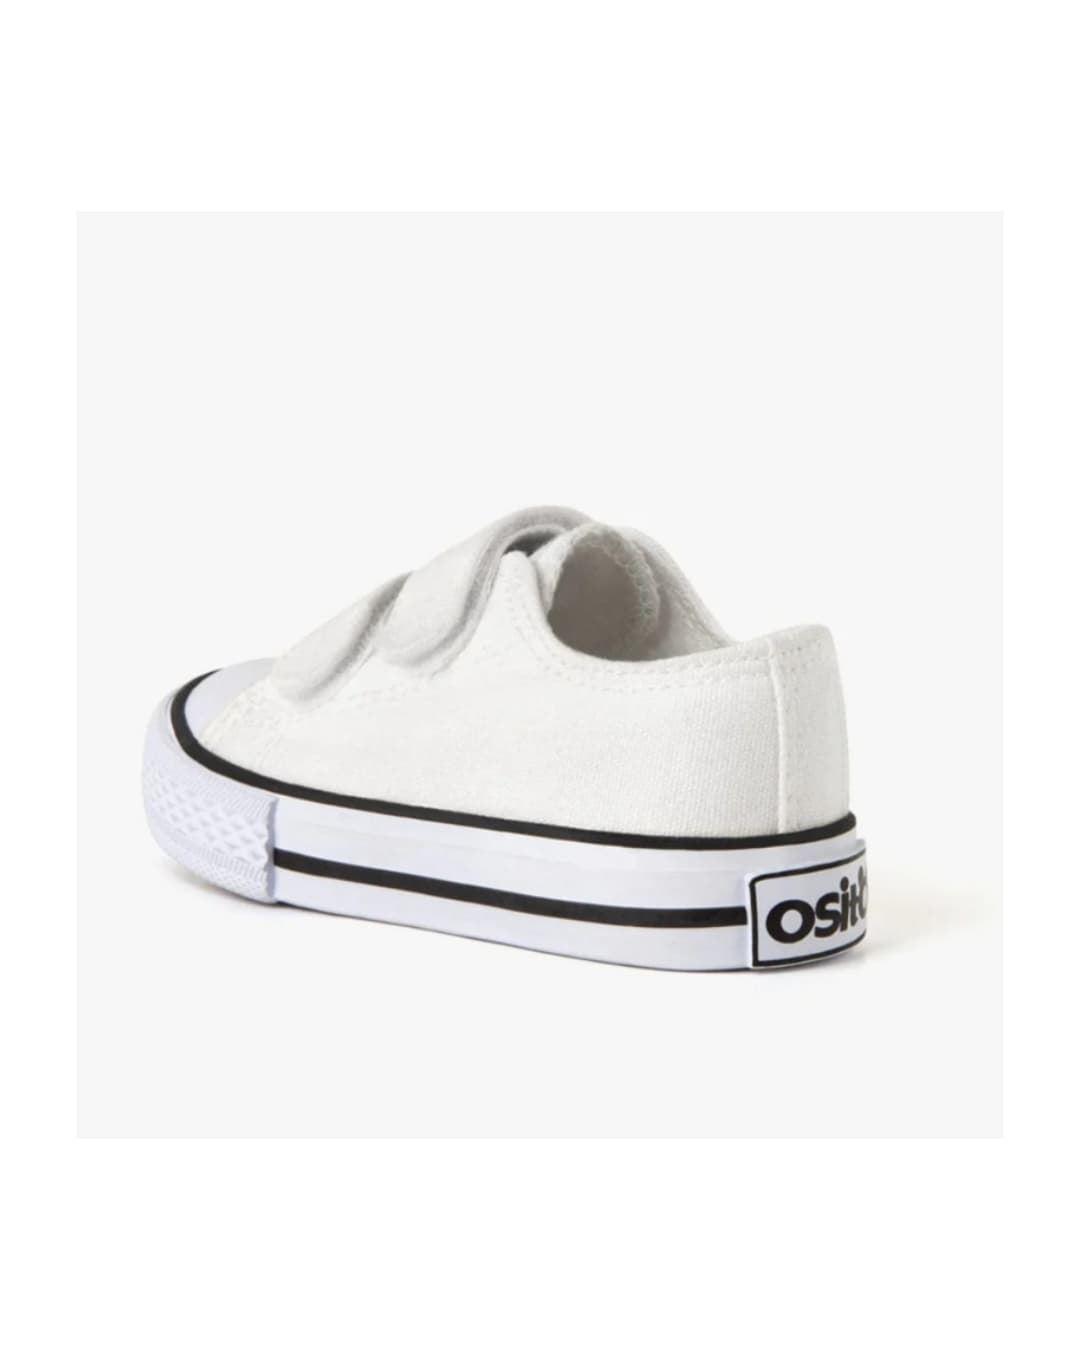 Conguitos Baby Sneakers Canvas White - Image 3